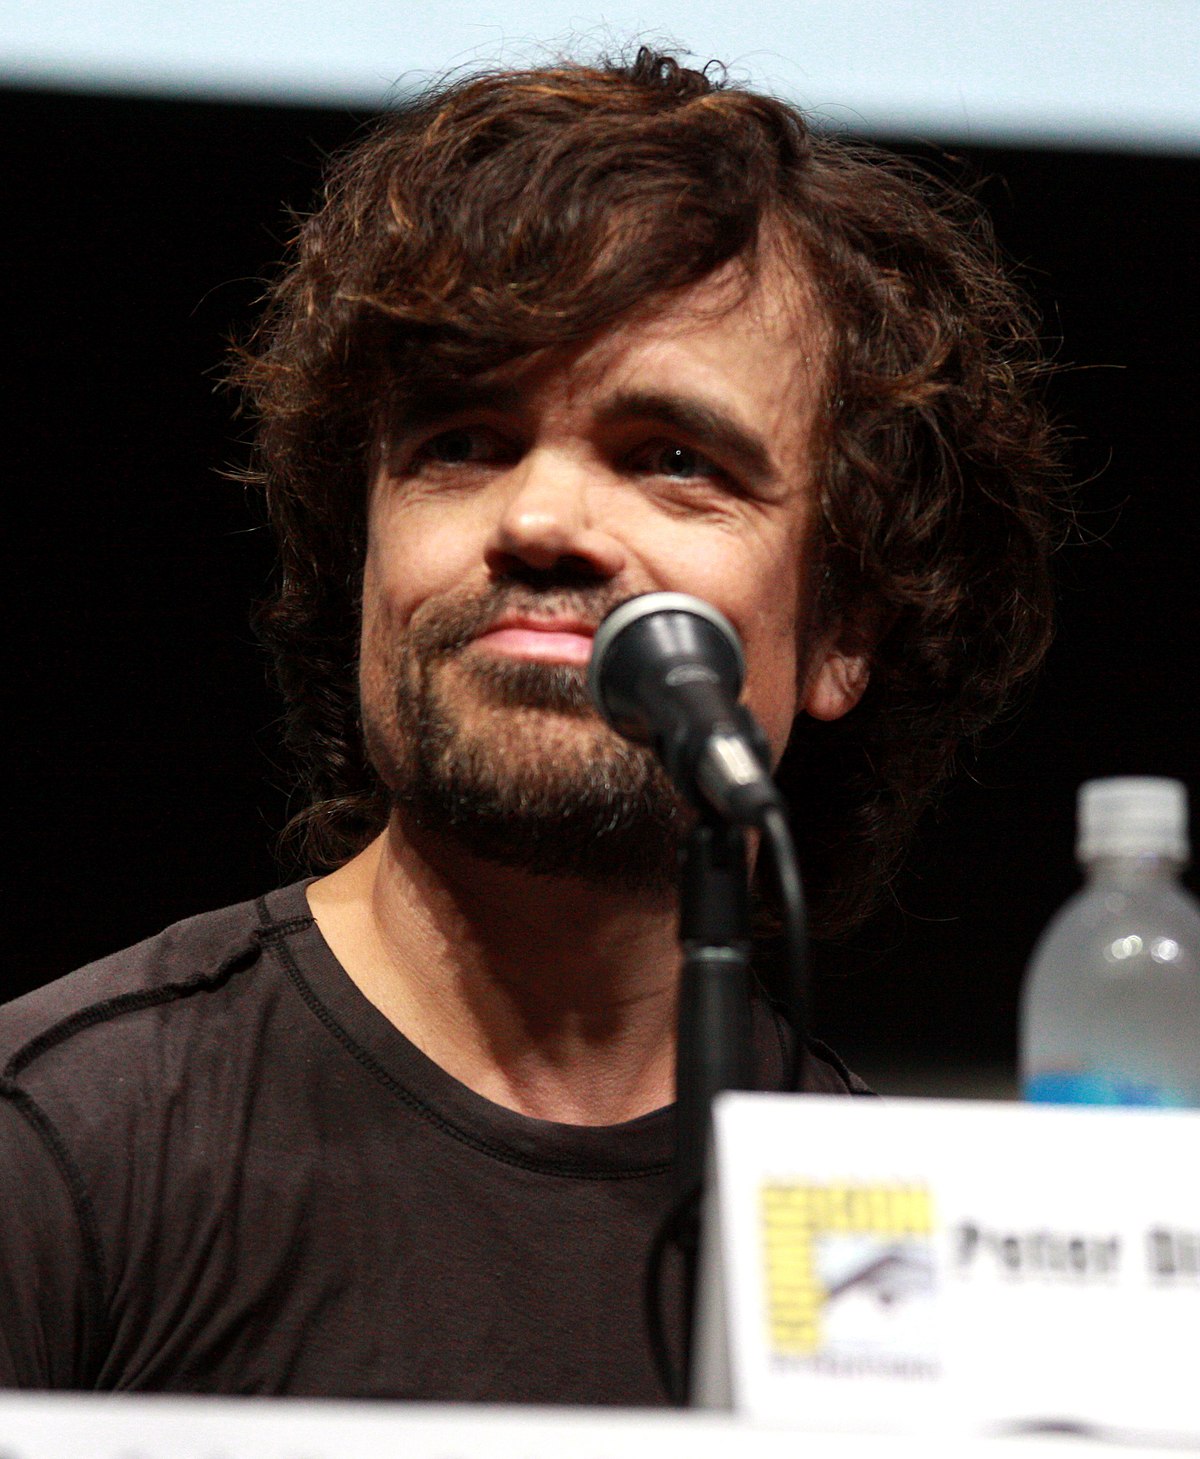 Peter Dinklage at the 2013 San Diego Comic-Con